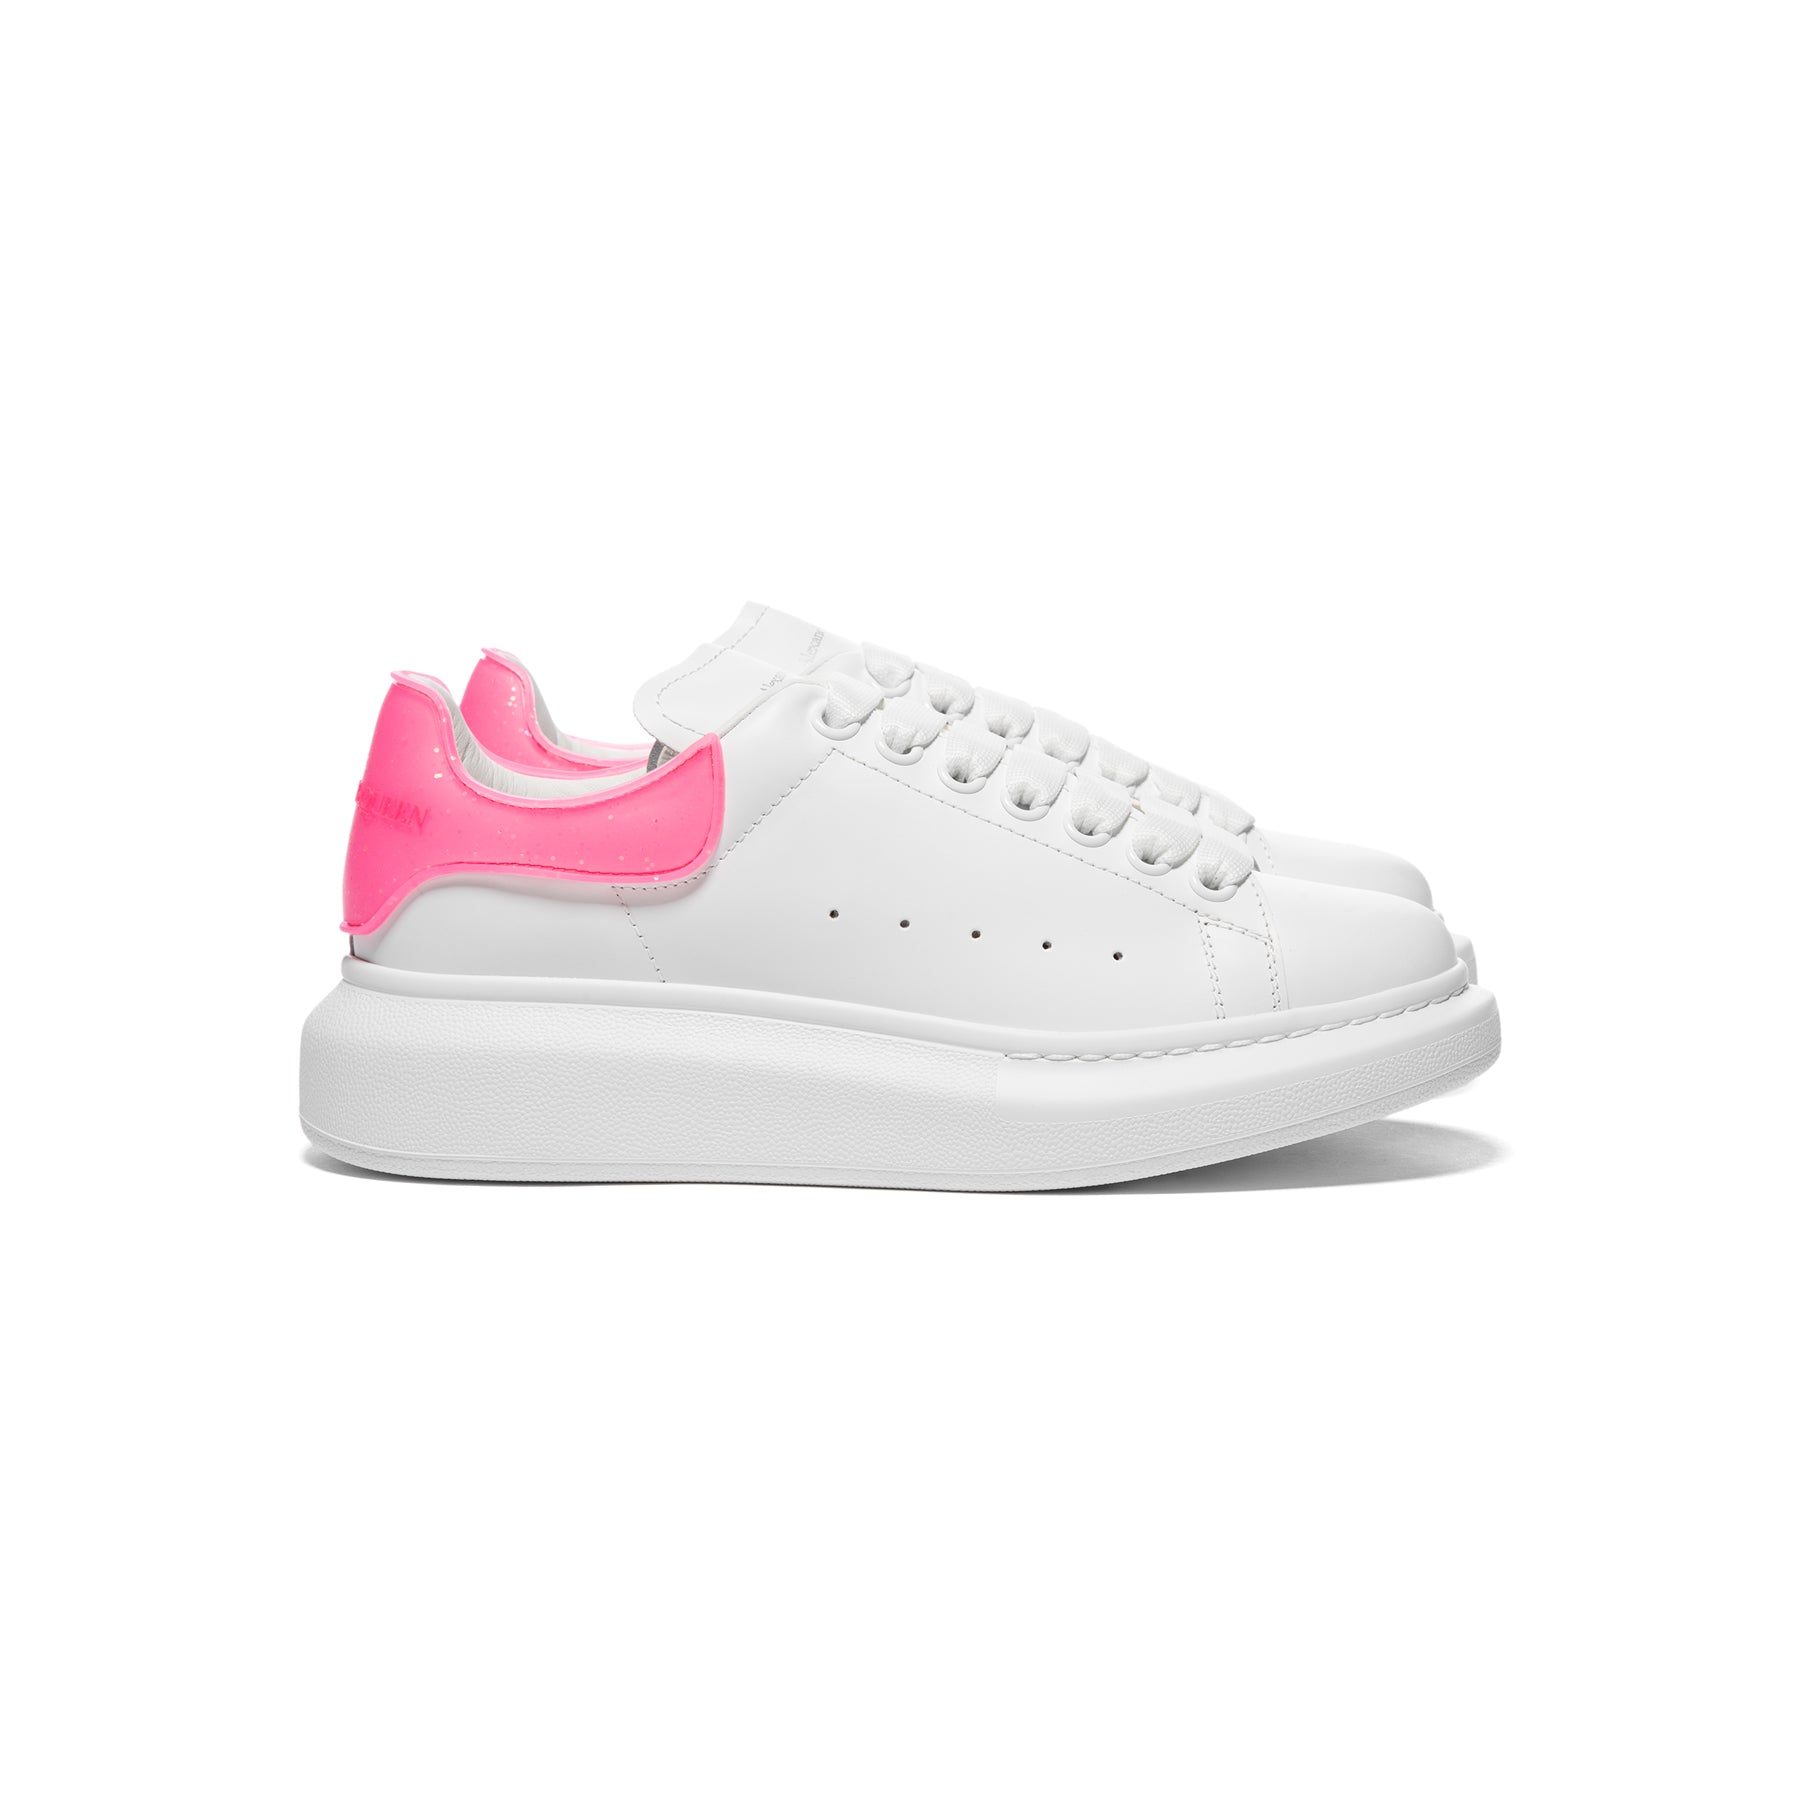 McQueen Womens Oversized Sneaker (White/Bright – Concepts